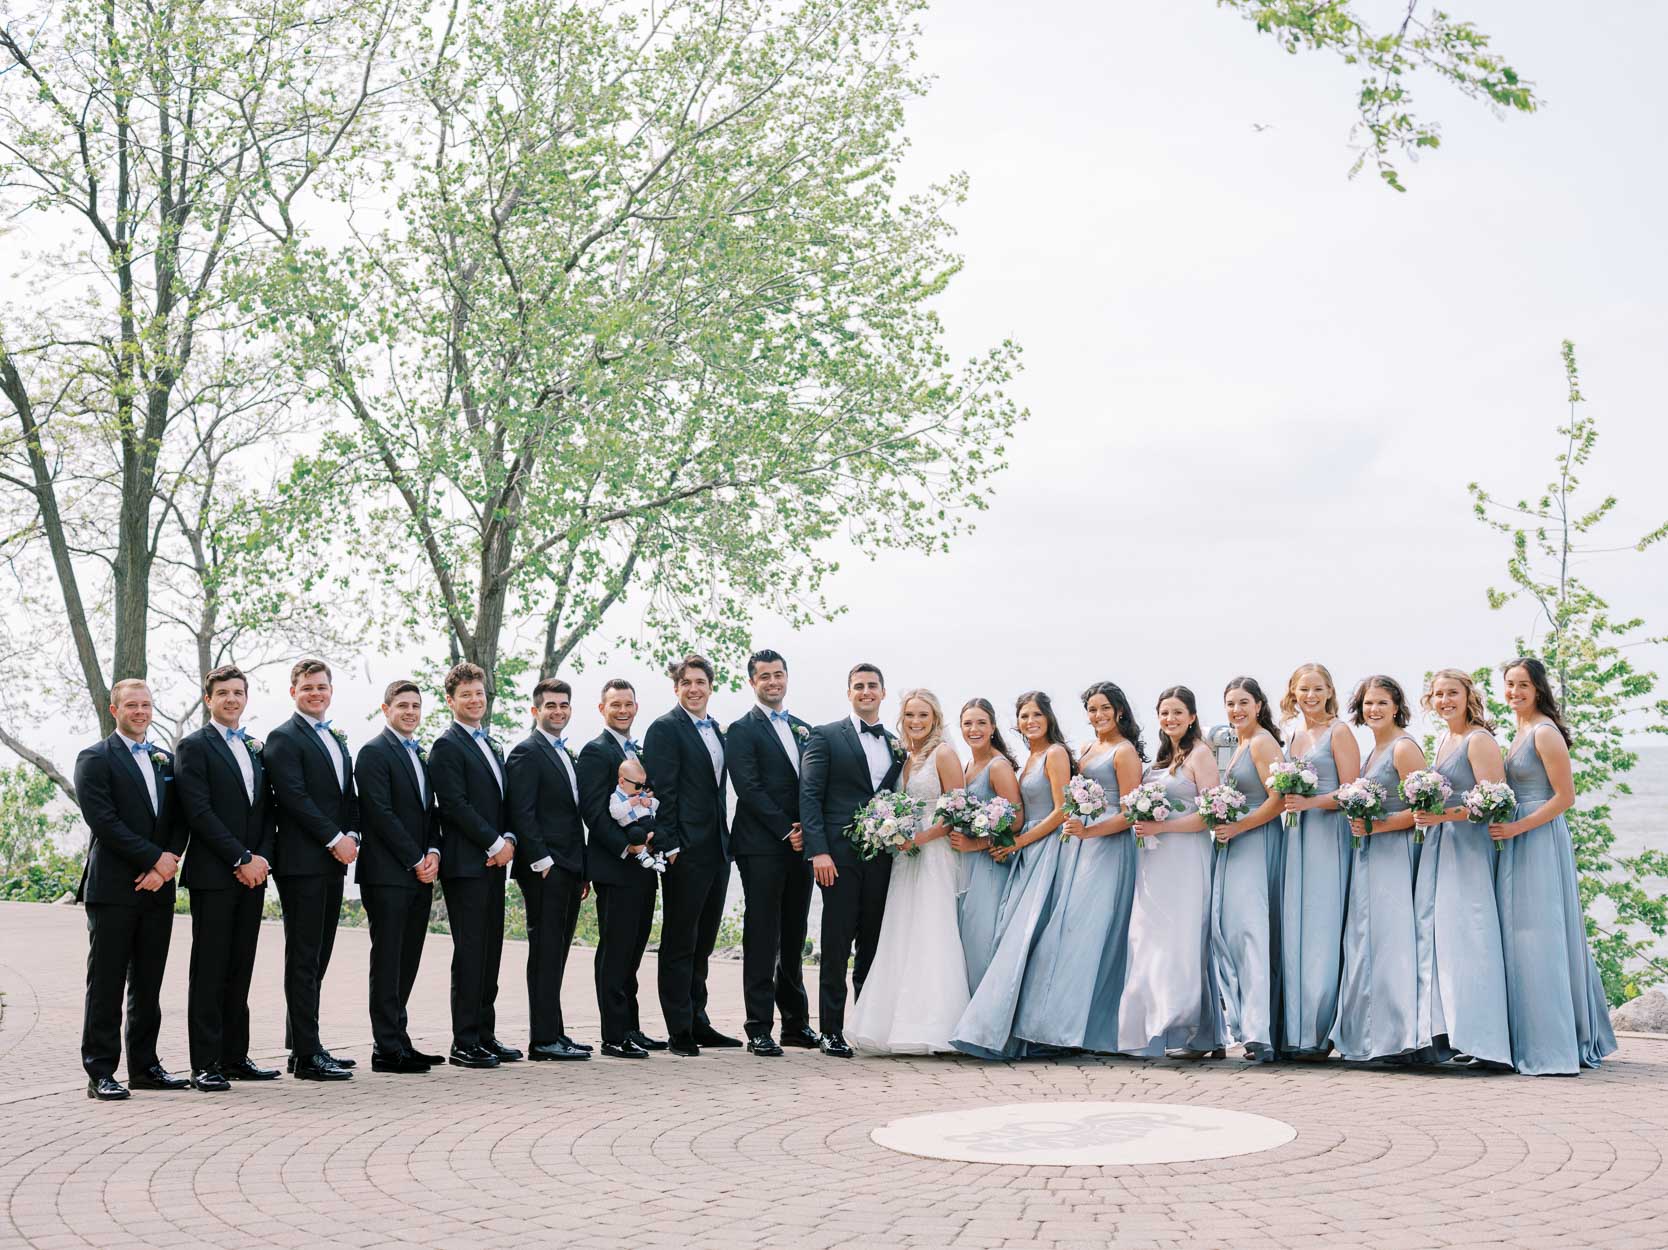 Bridal party portraits at Lakewood Park in Cleveland, Ohio